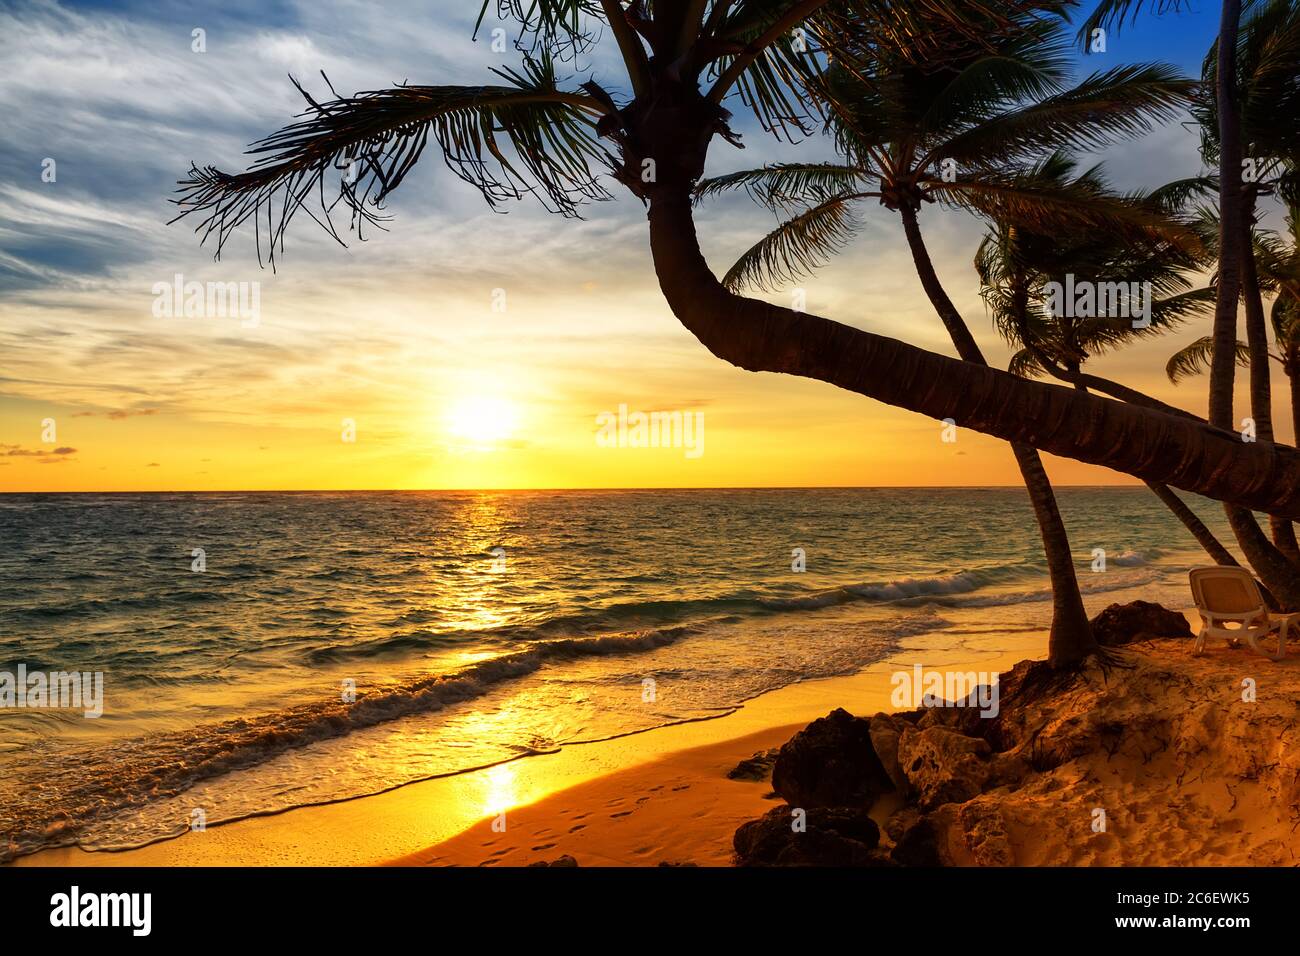 Palm trees silhouette on sunset tropical beach. Coconut palm trees against colorful sunset on the beach in Punta Cana, Dominican Republic. Stock Photo